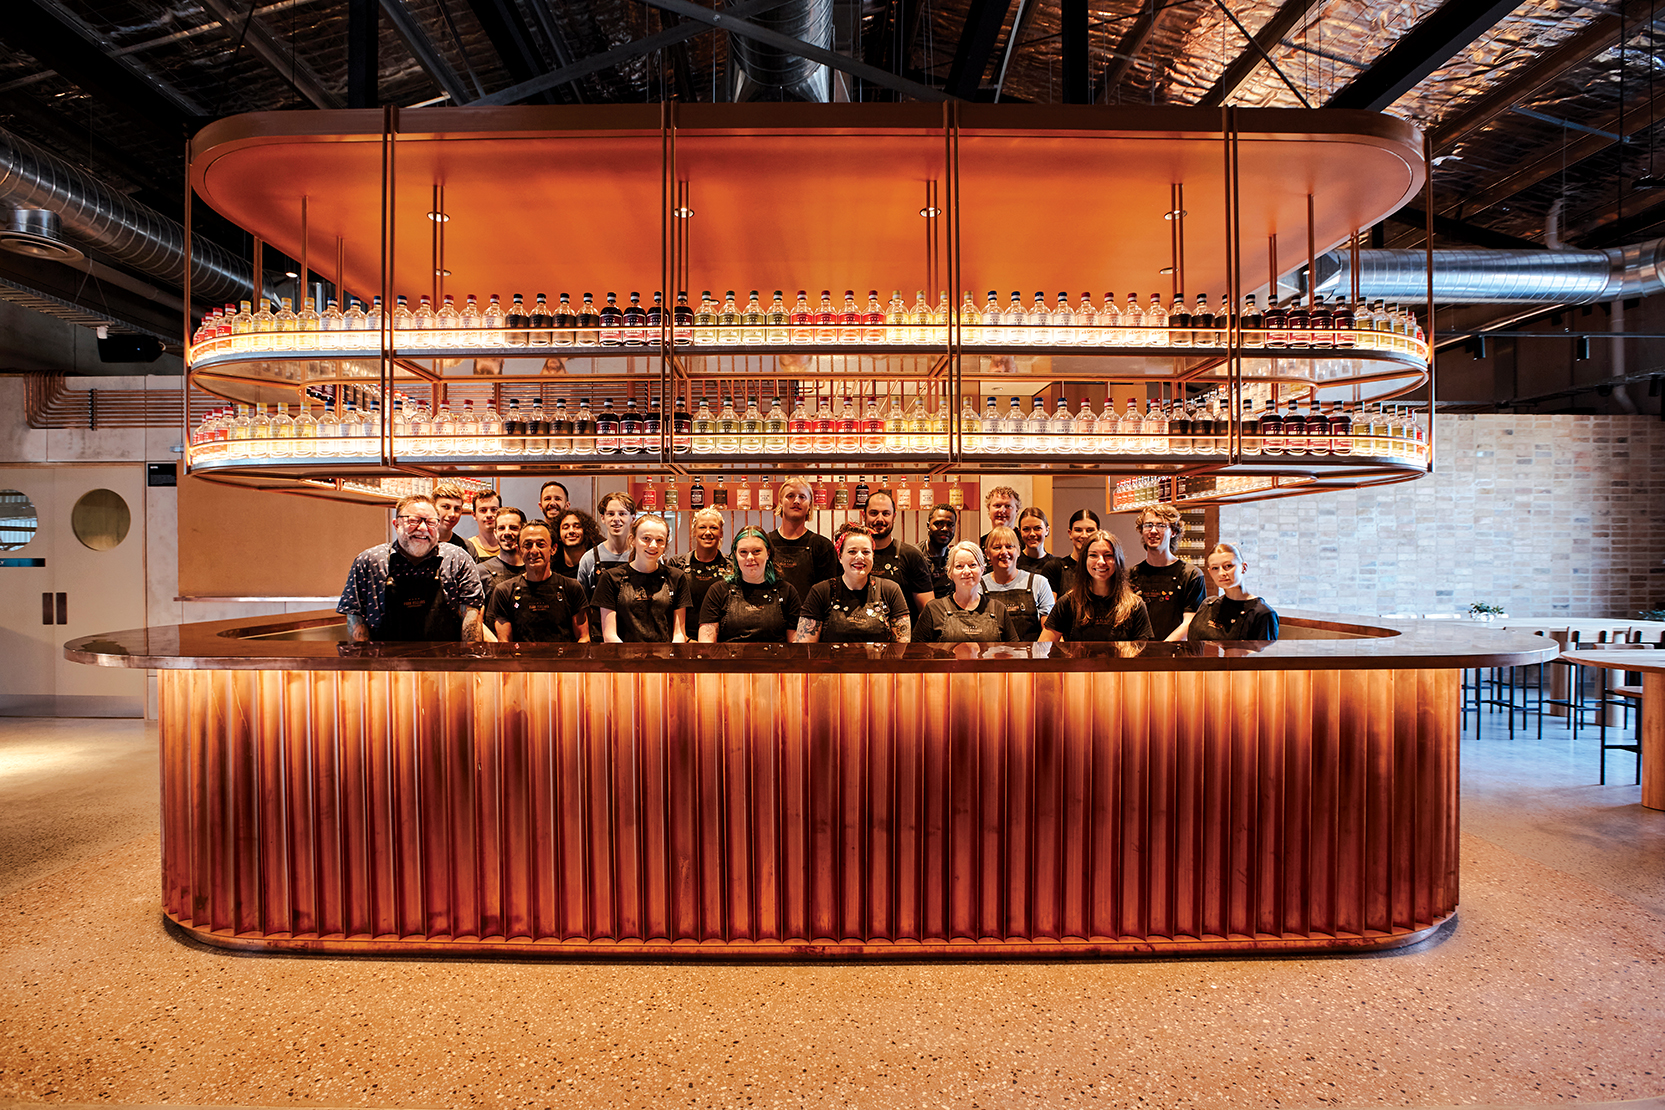 The team at Four Pillars' new distillery and bar in the Yarra Valley, Australia